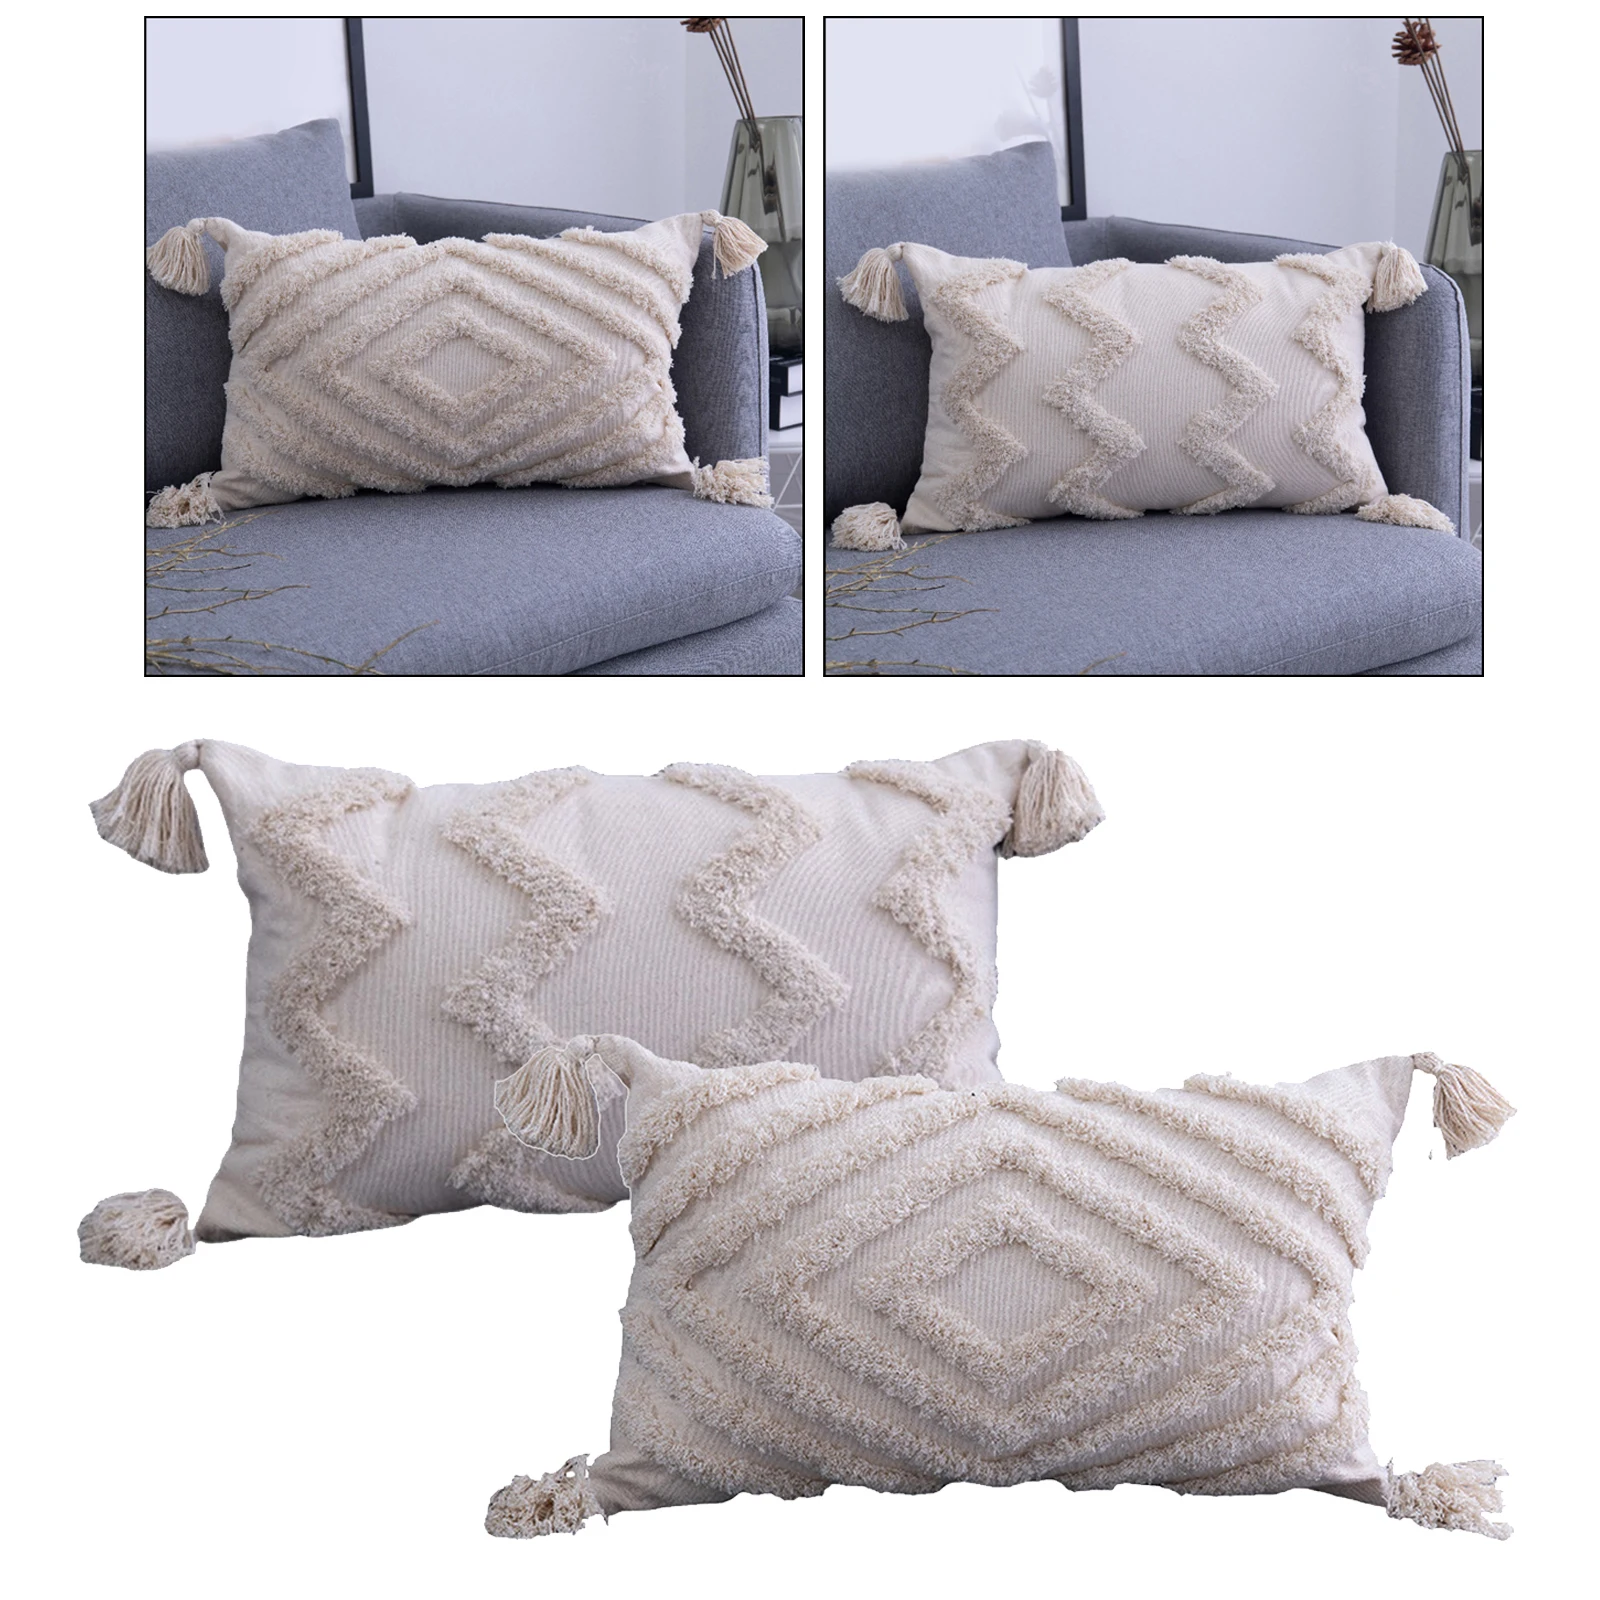 2x Throw Pillow Covers Fringe Woven Tufted Pillowcases for Couch Sofa Decor